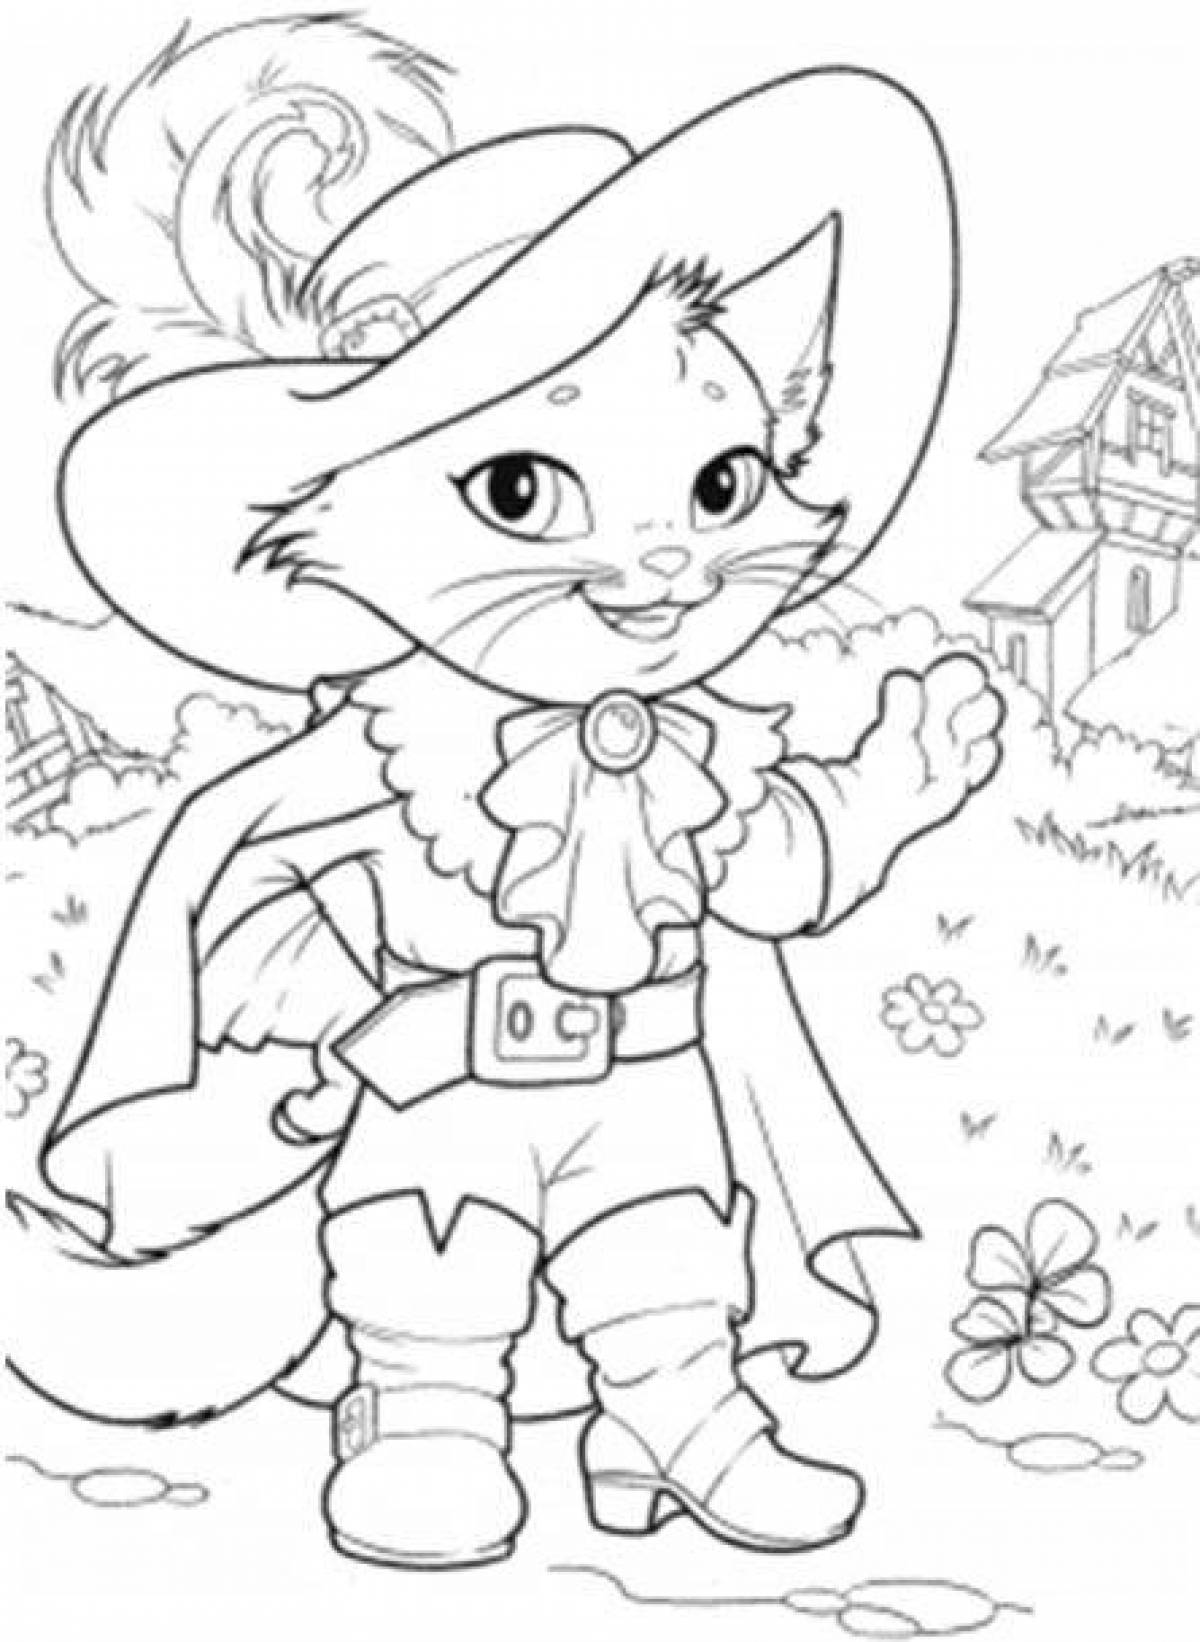 Animated puss in boots coloring book for kids